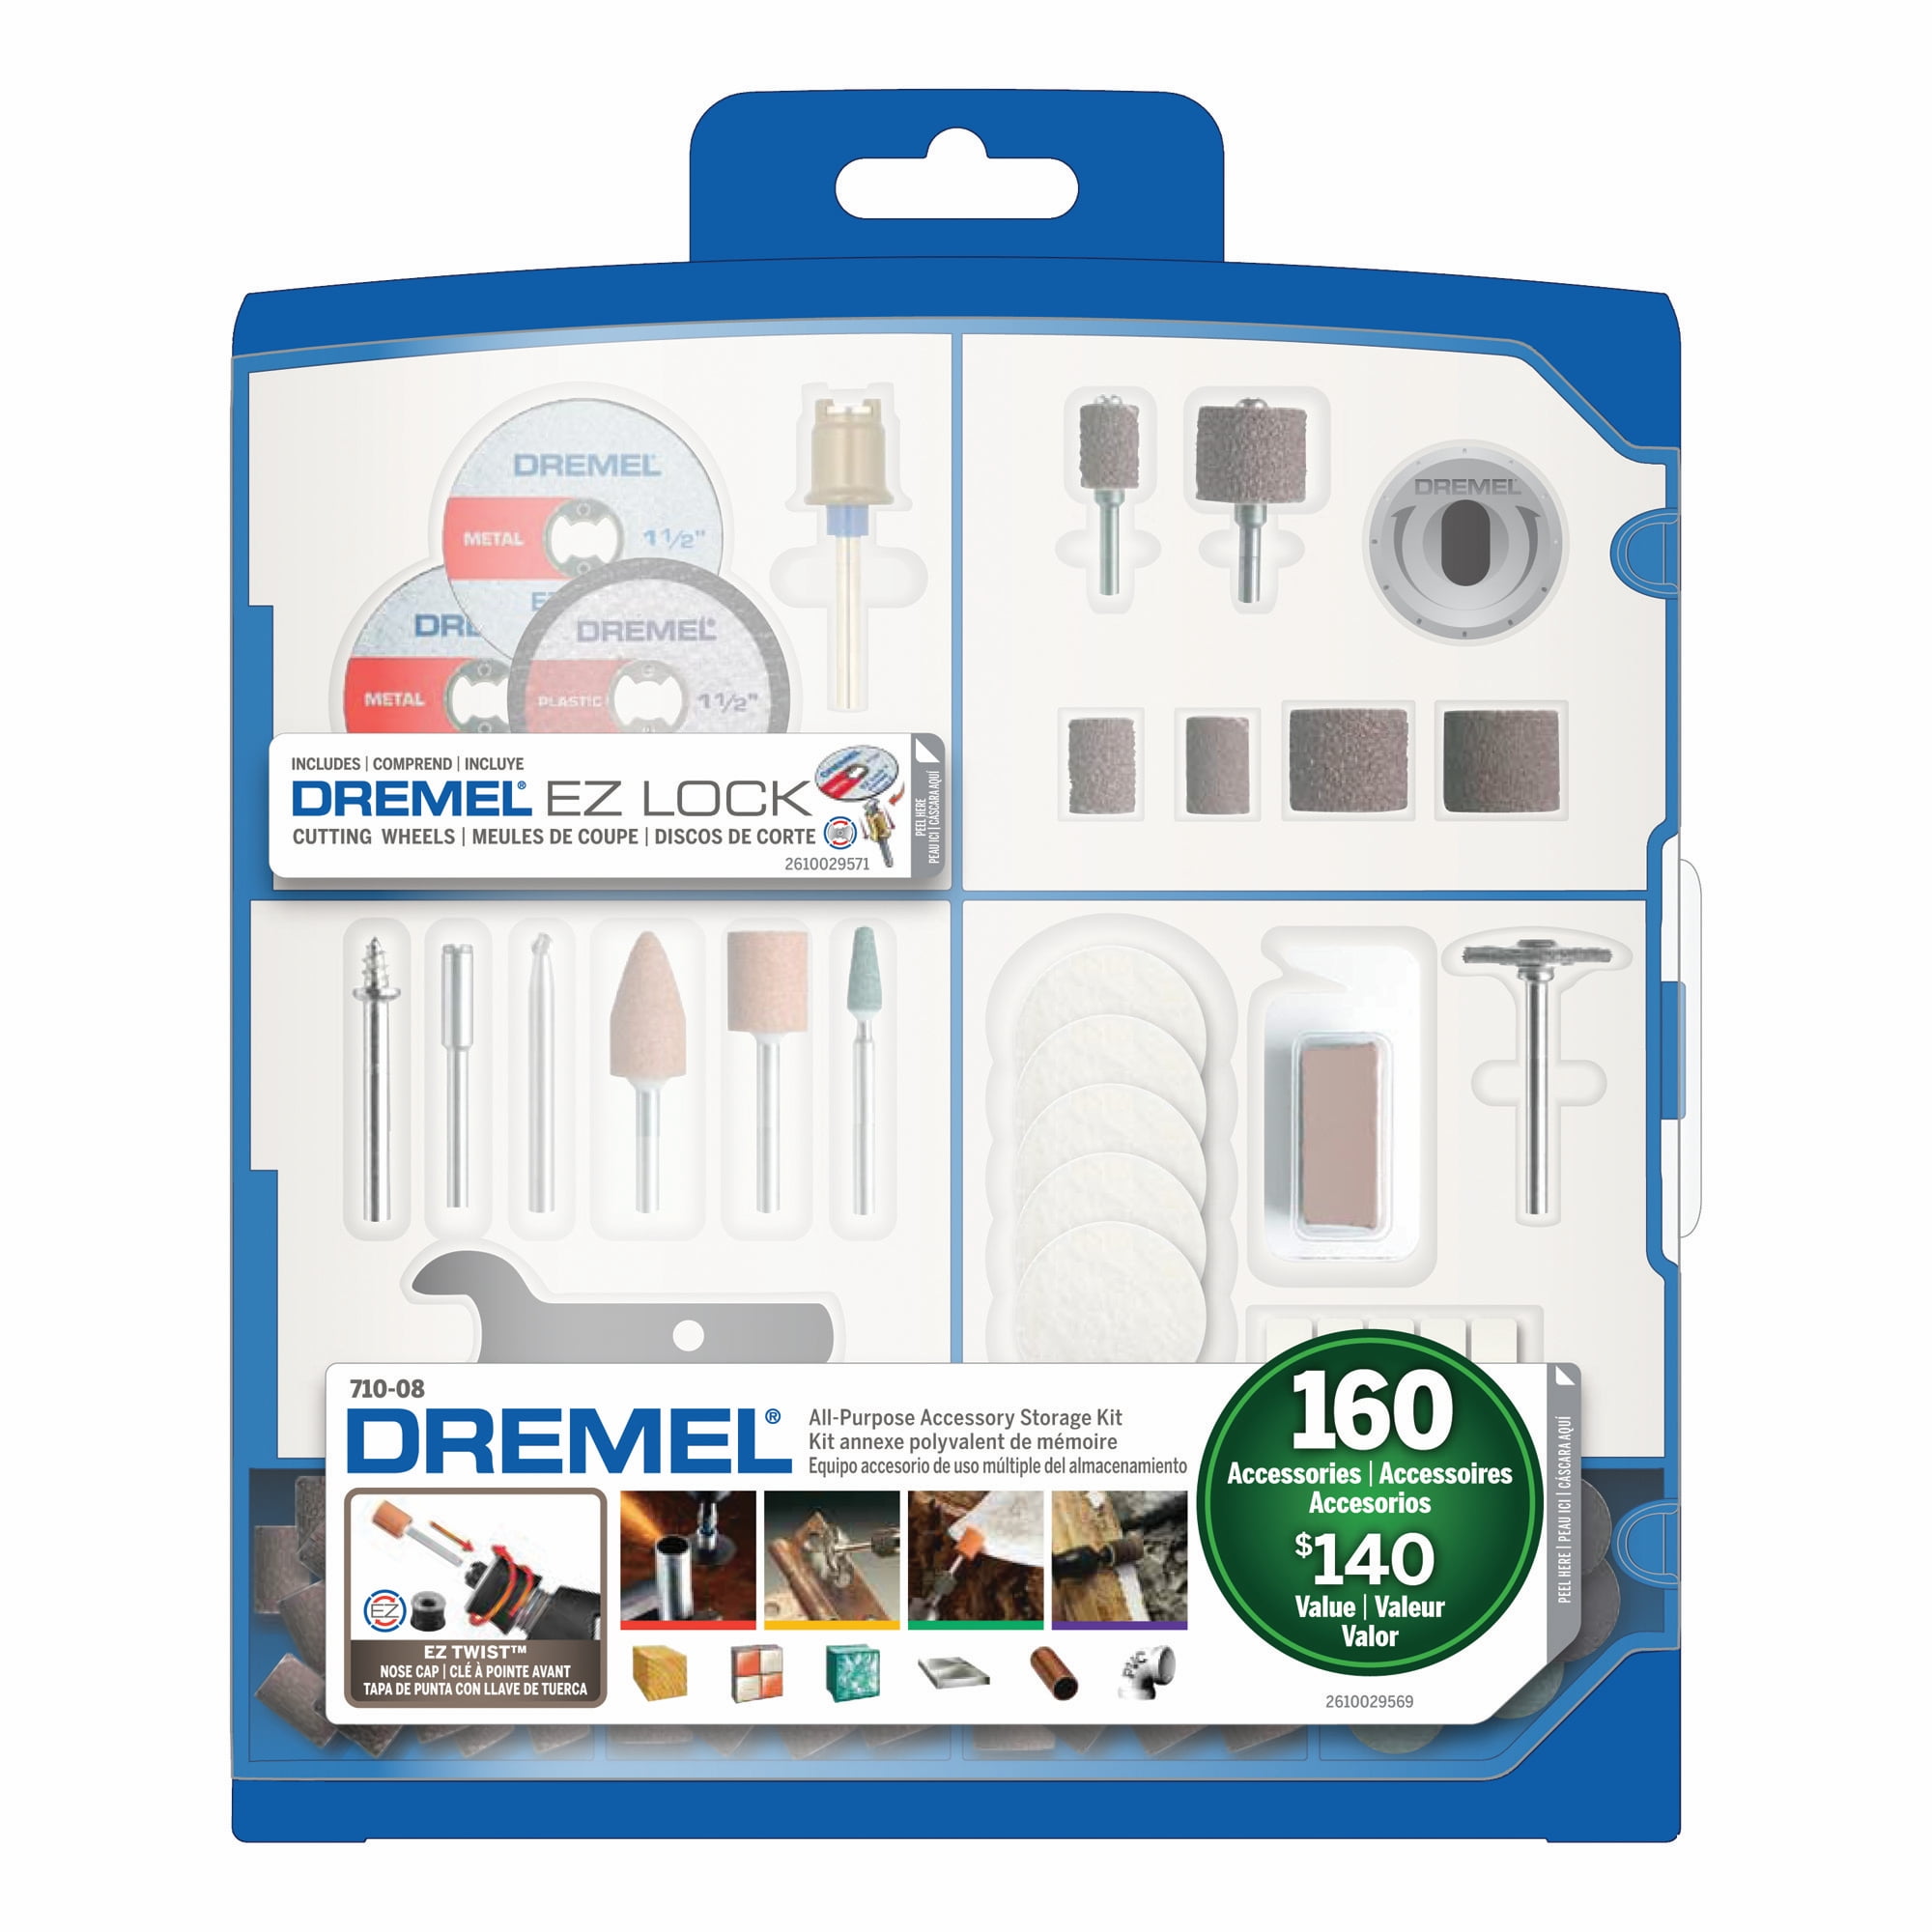 CLEARANCE LINE ROTARY TOOL ACCESSORIES DREMEL FITTING CUTTING SANDING POLISHING 